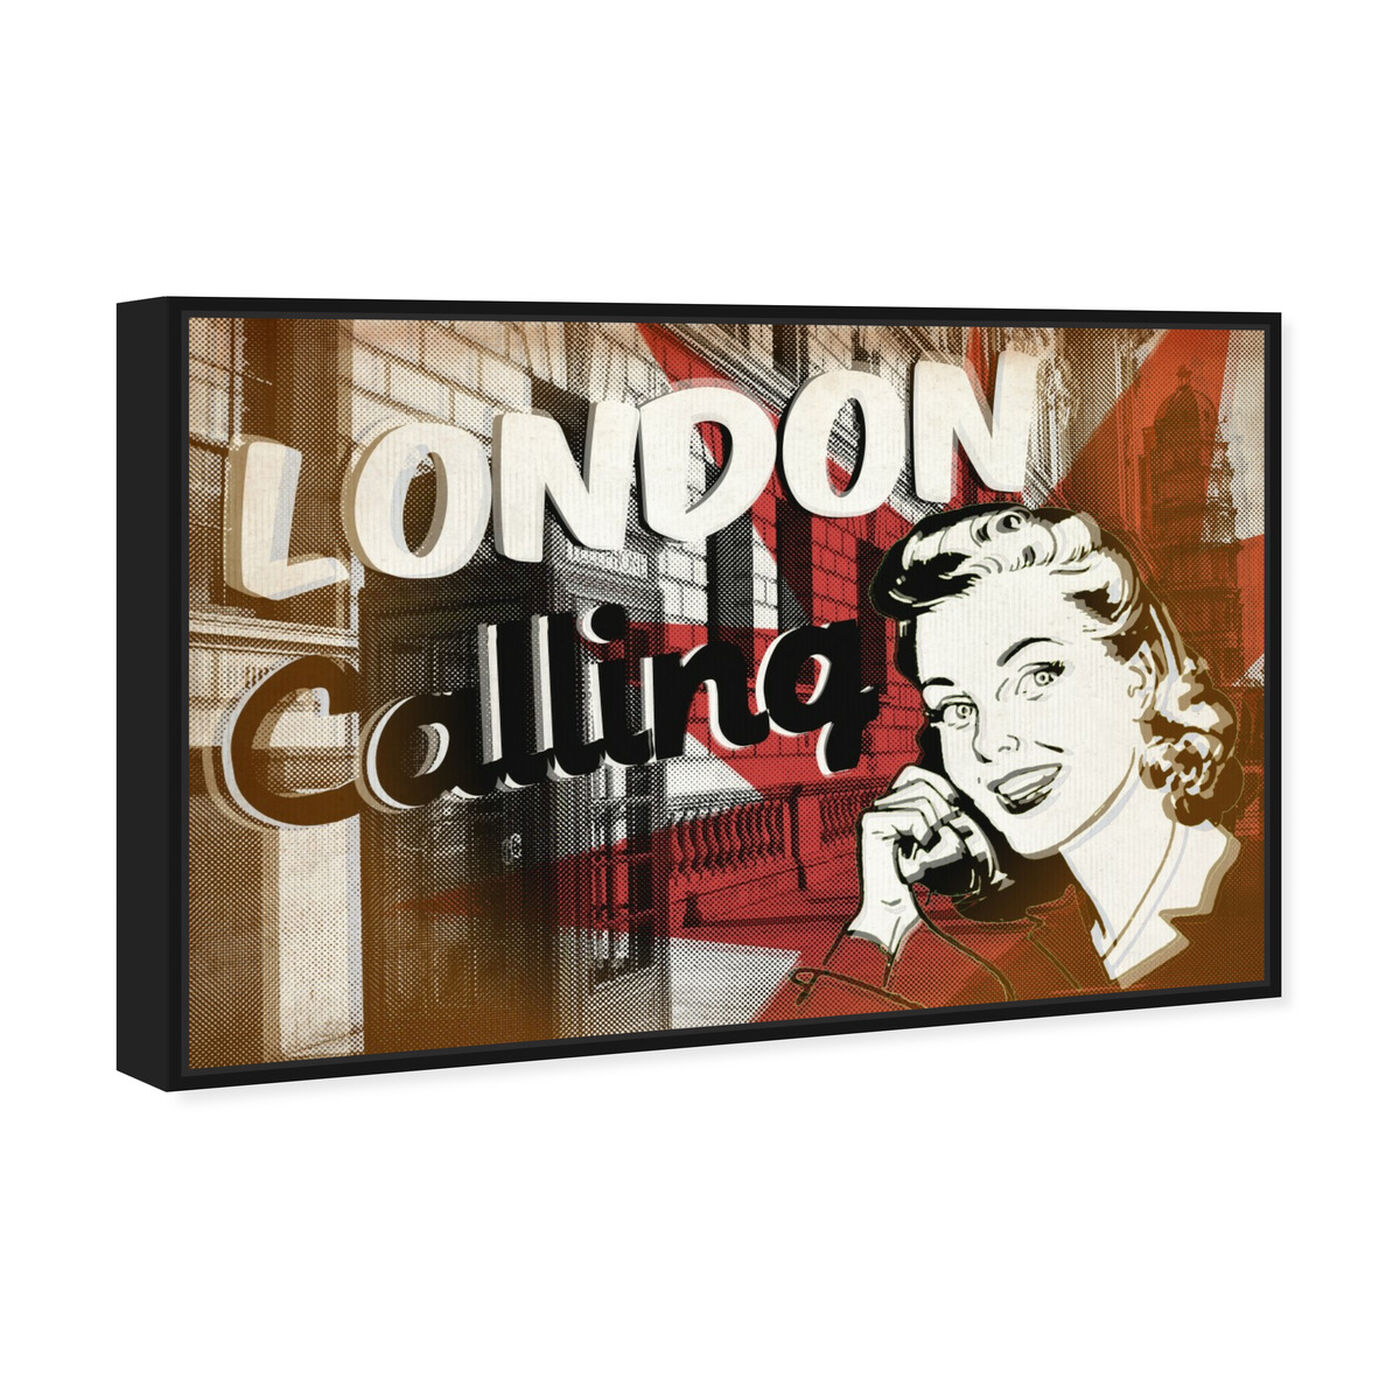 Angled view of London Calling featuring advertising and posters art.